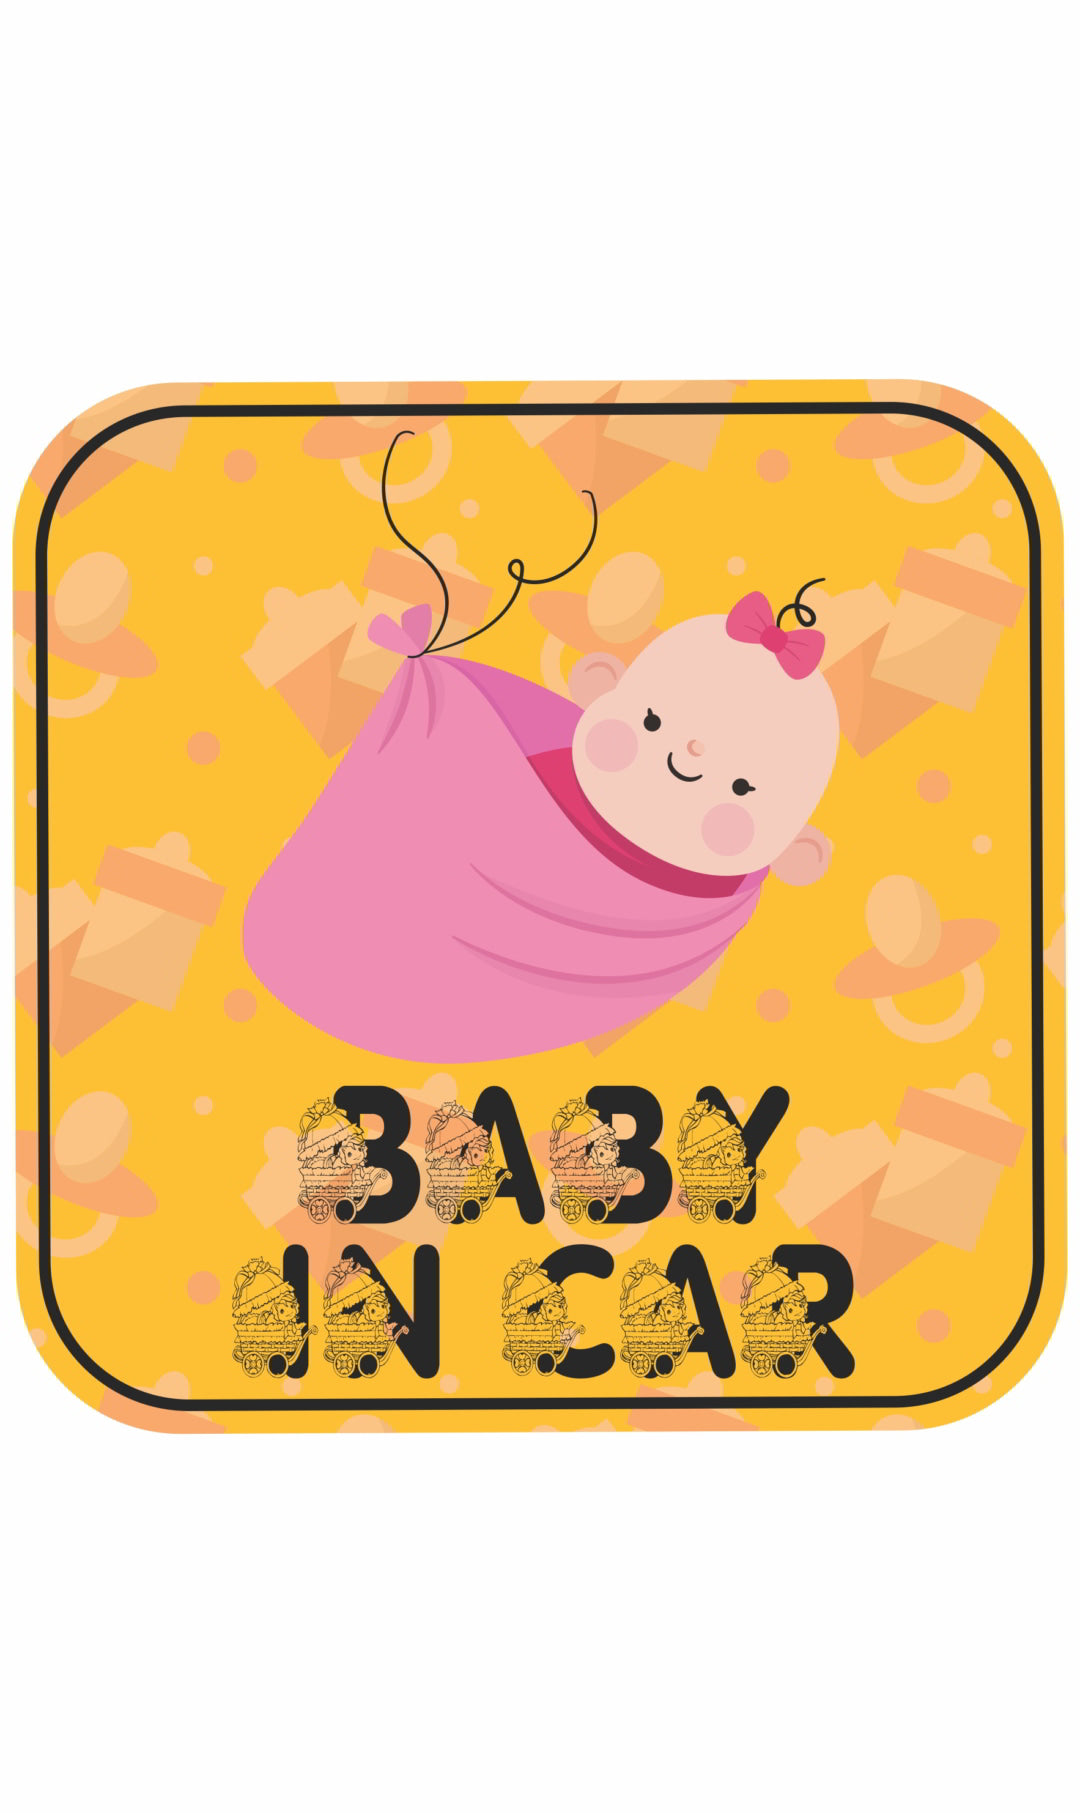 Baby in Car Decal Sticker(2pc)_c22